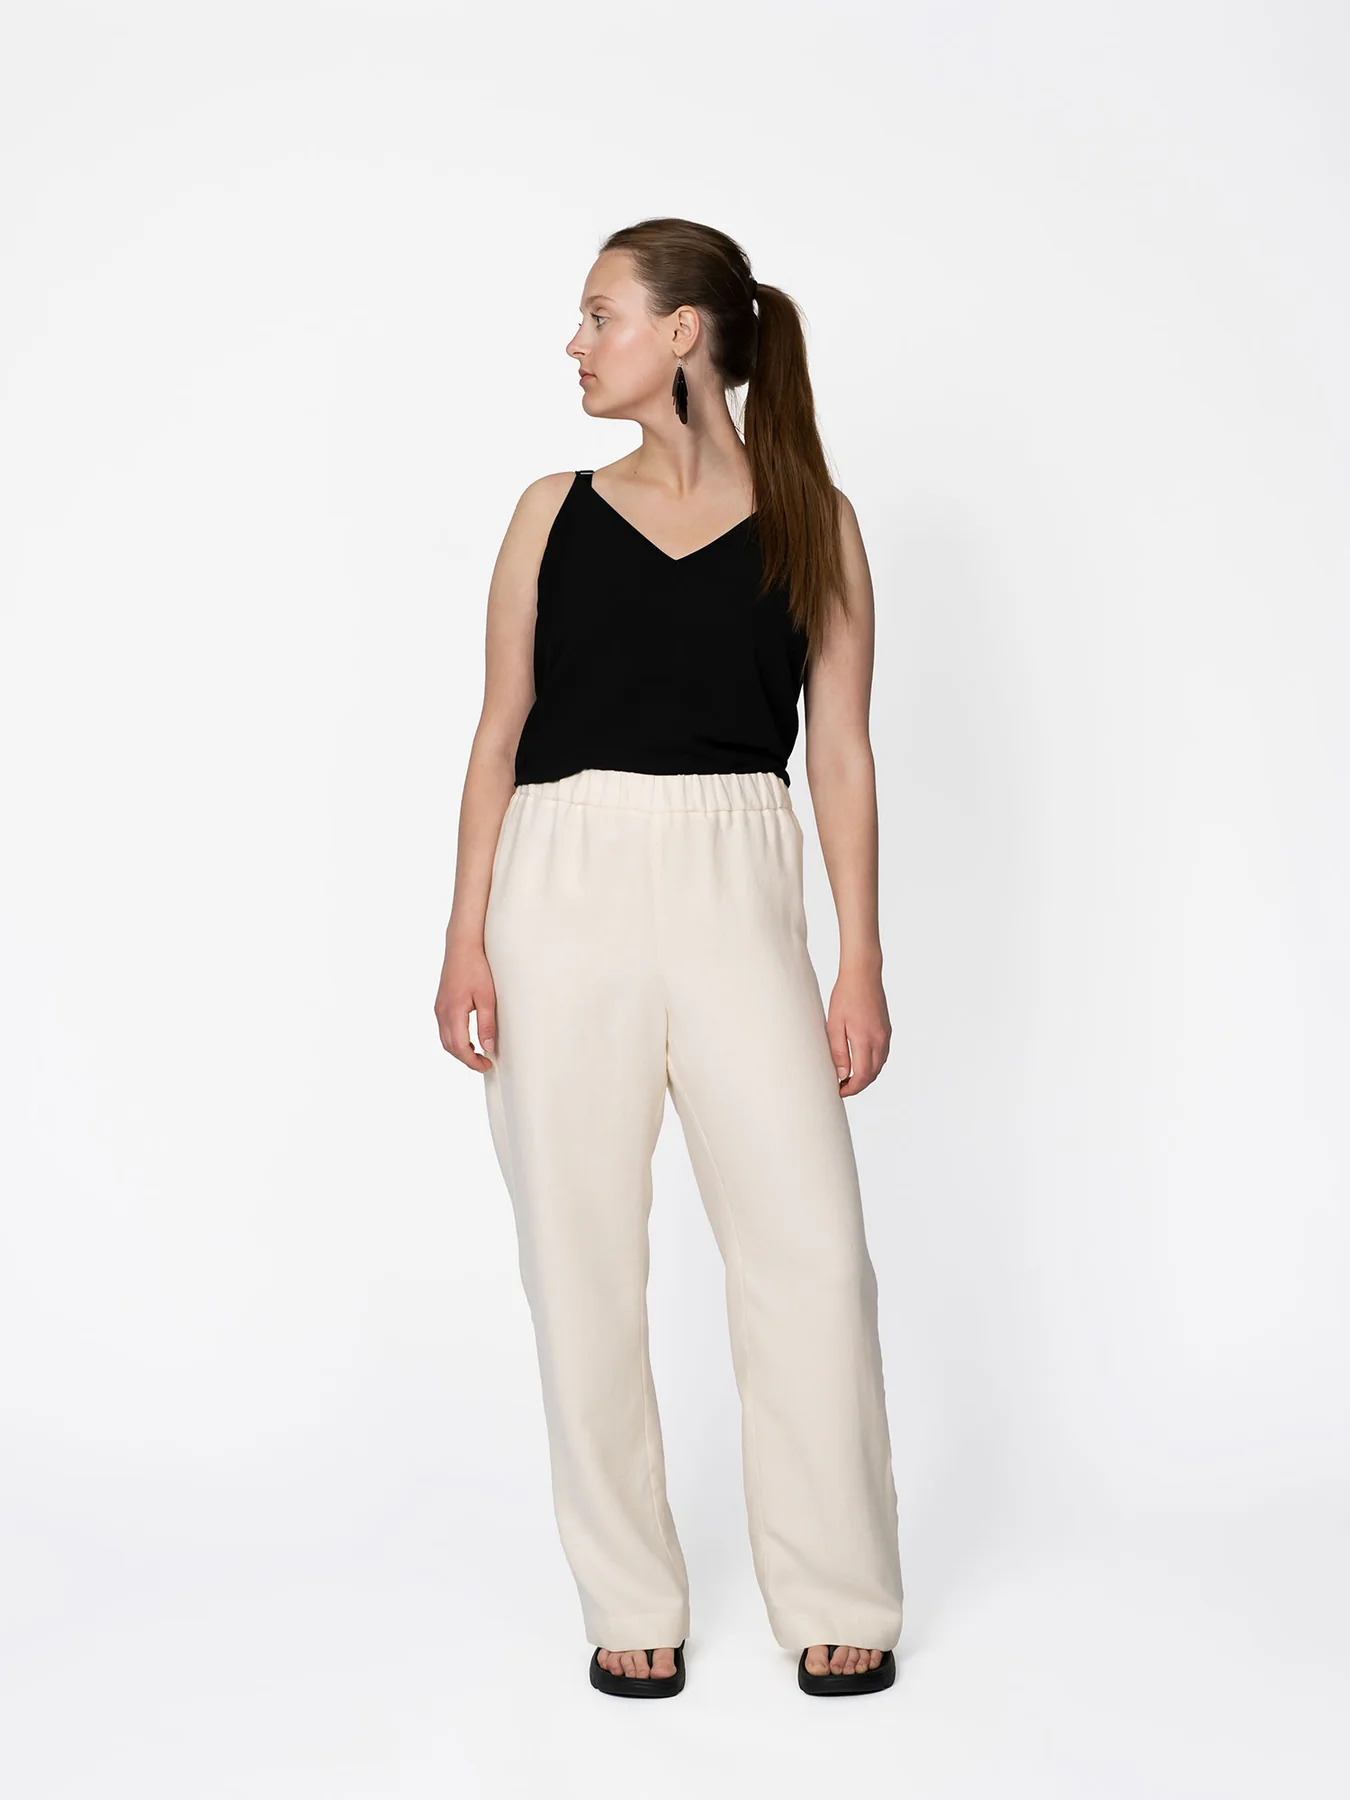 Pull on trousers (XL-3XL)